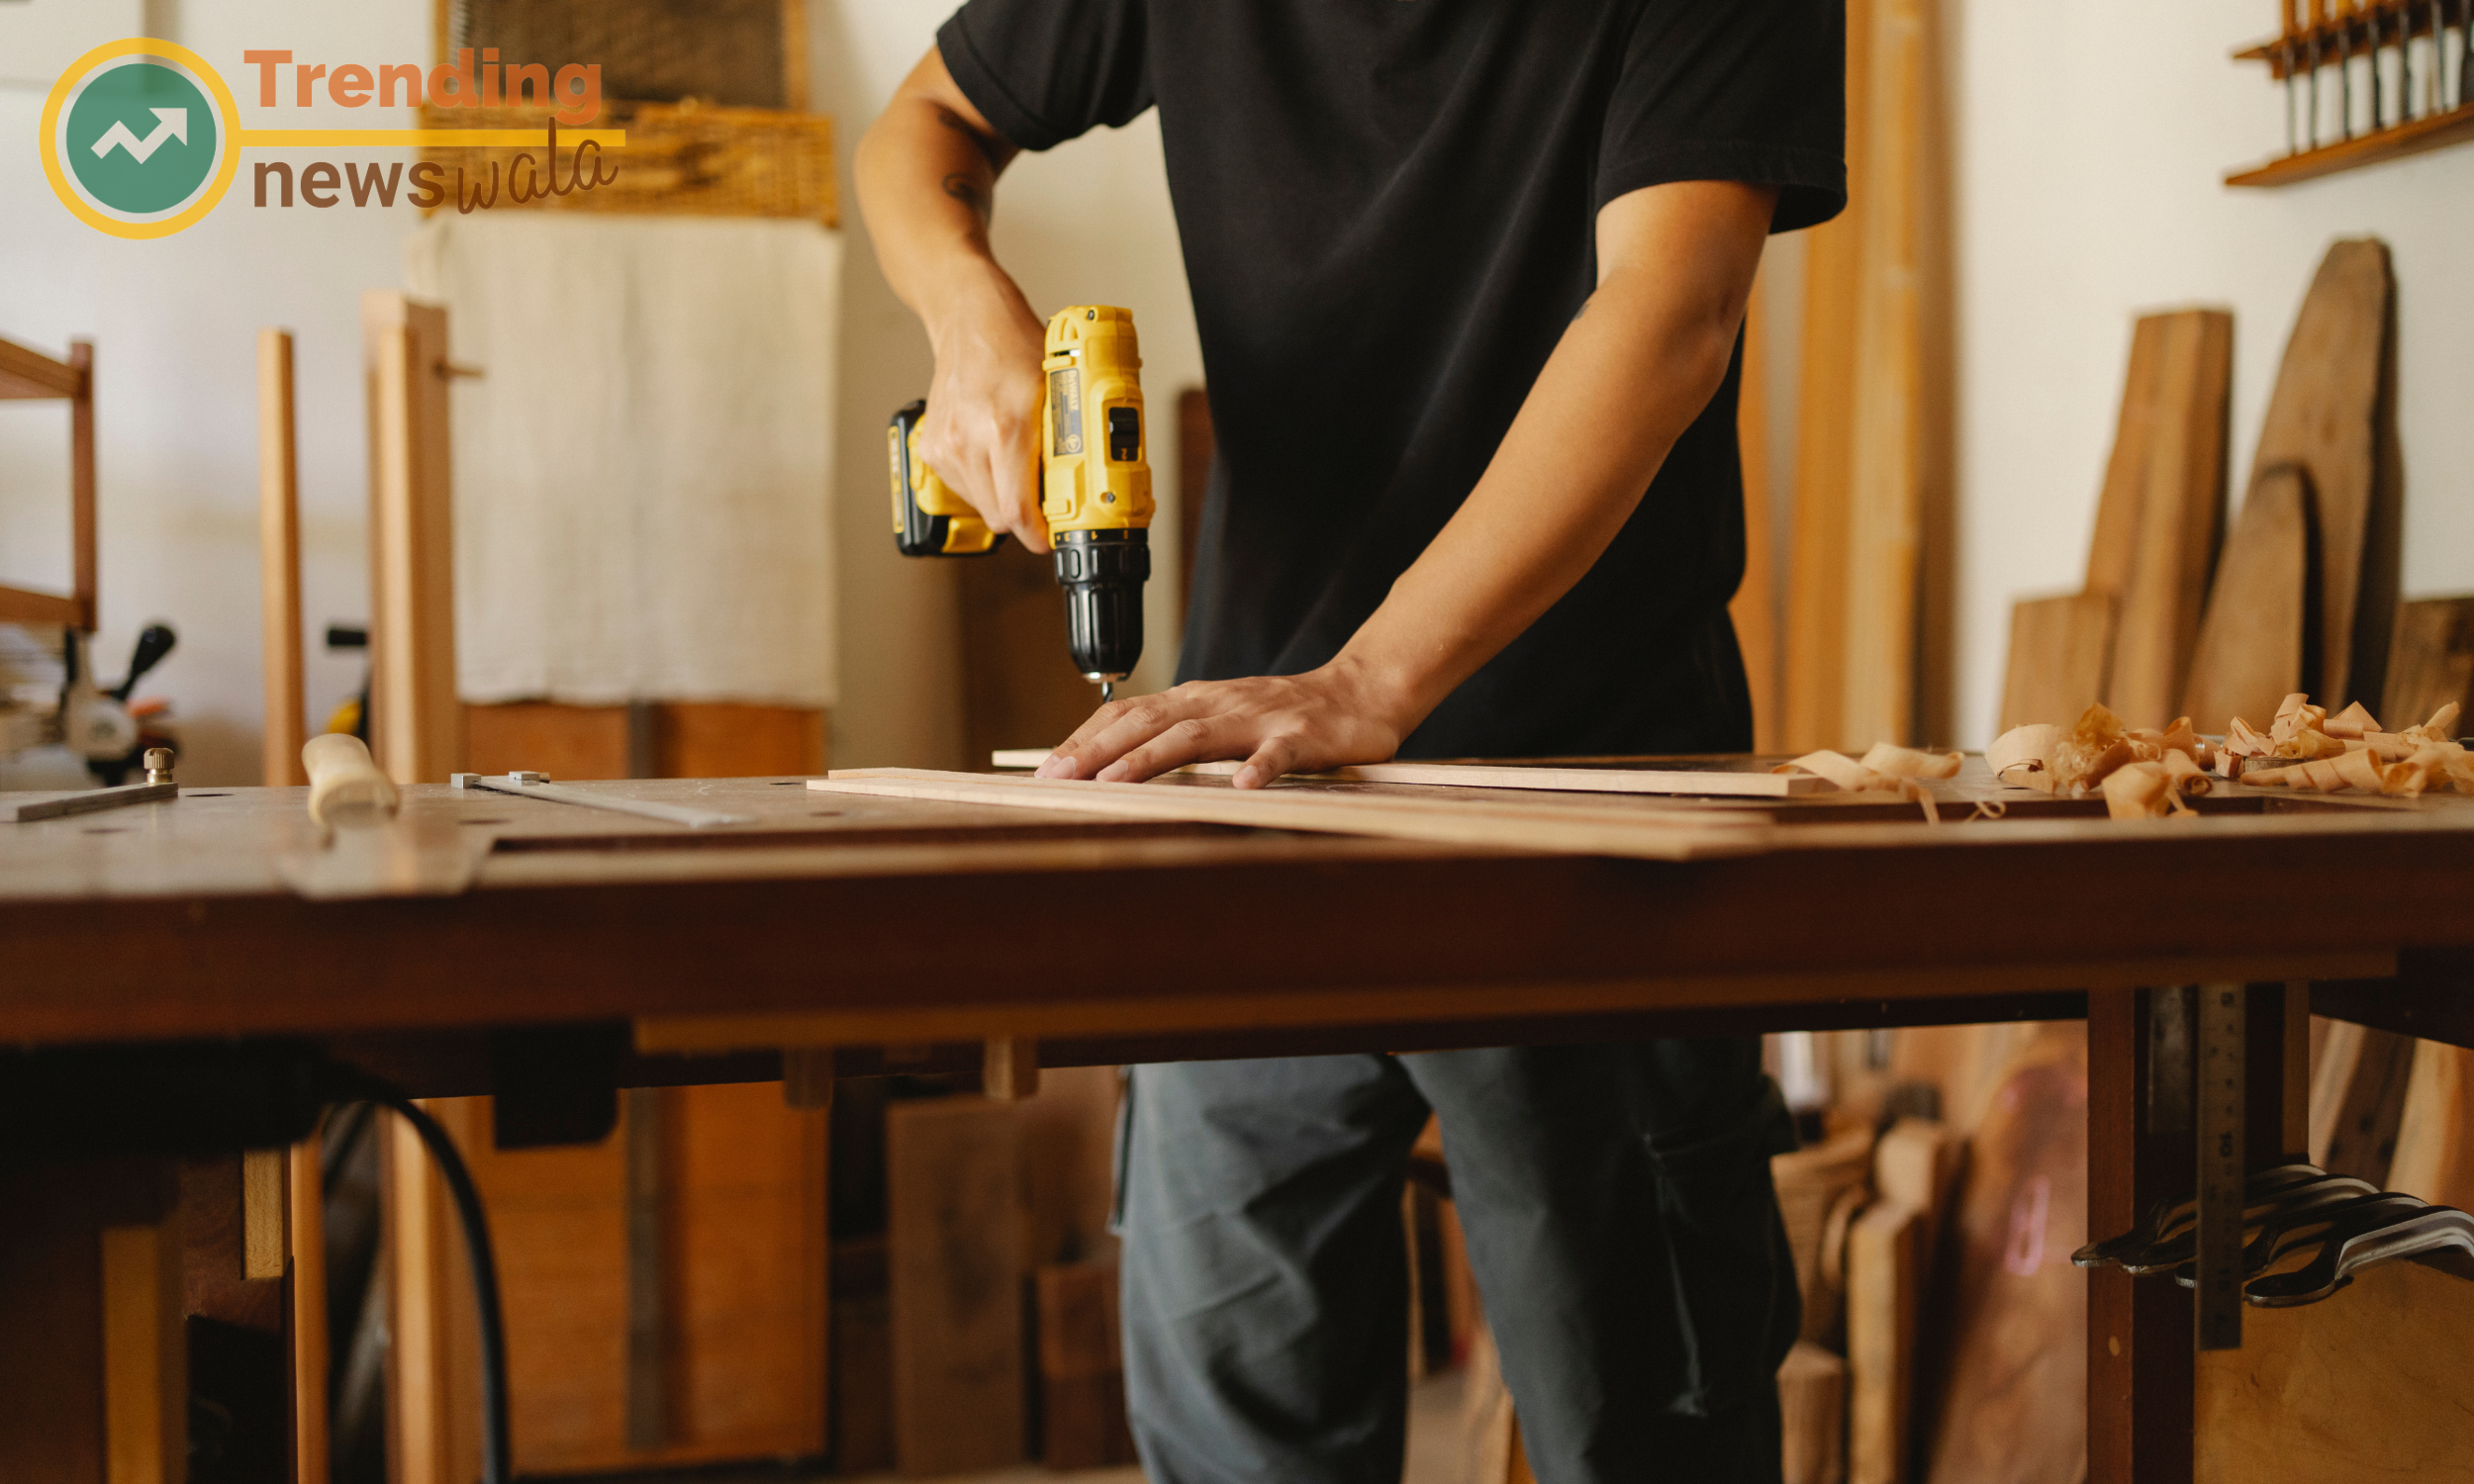 Carpenters often engage in custom woodworking projects